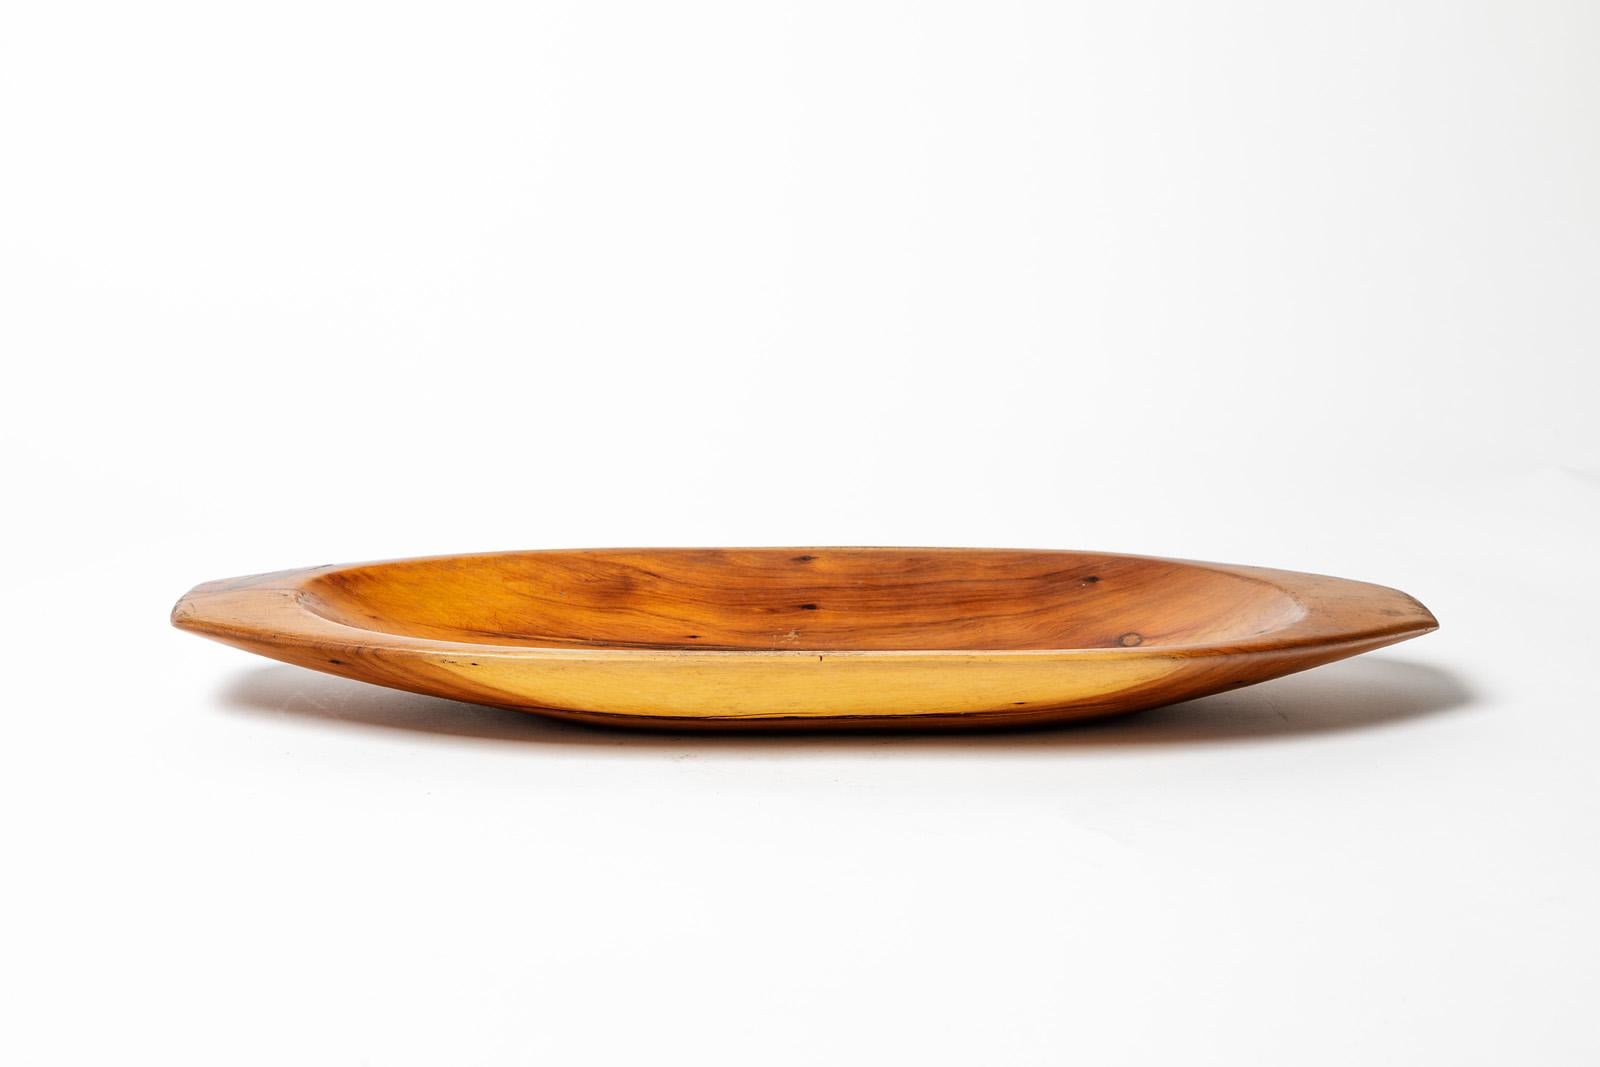 20th Century Olive Wood Sculptural Plate or Dish circa 1950 French Design Bowl For Sale